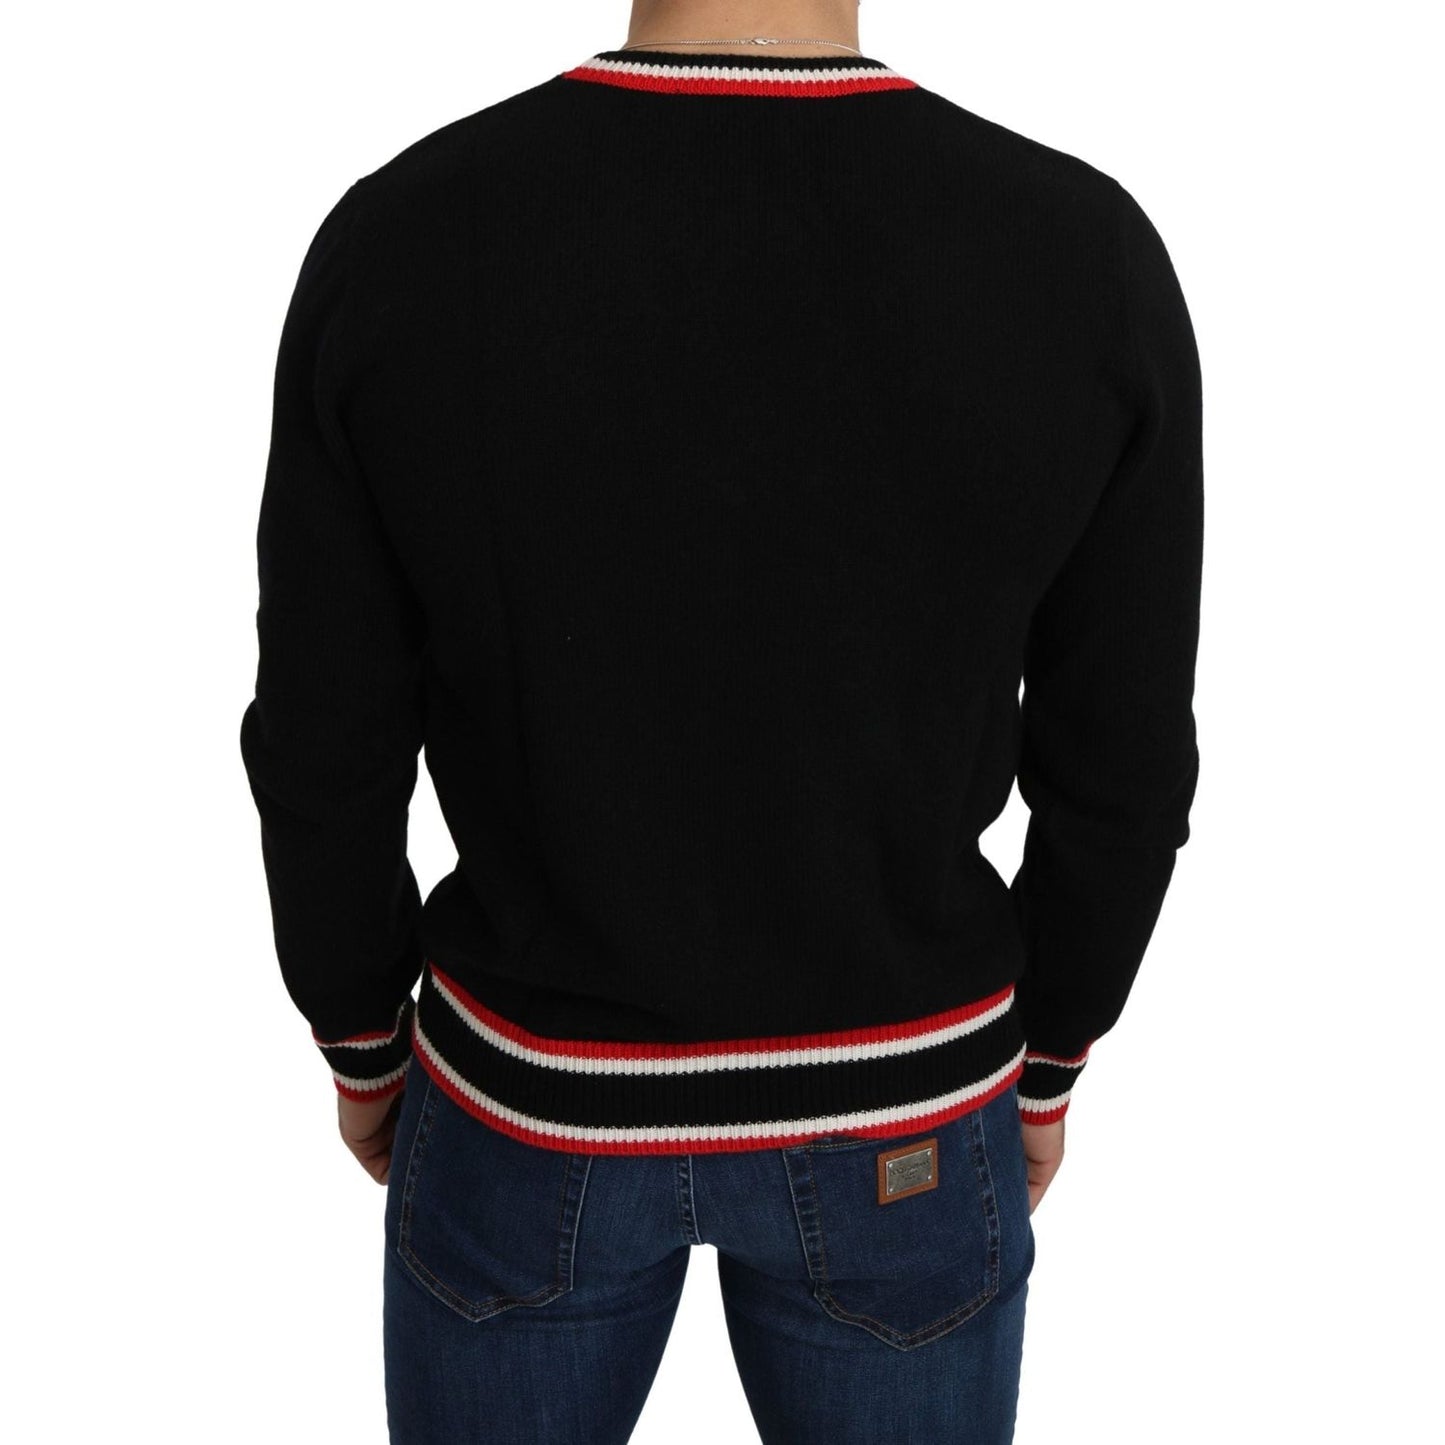 Dolce & Gabbana Elegant Black Cashmere Crew Neck Sweater black-cashmere-pig-of-the-year-pullover-sweater IMG_4382-scaled-6ecaee28-2db.jpg